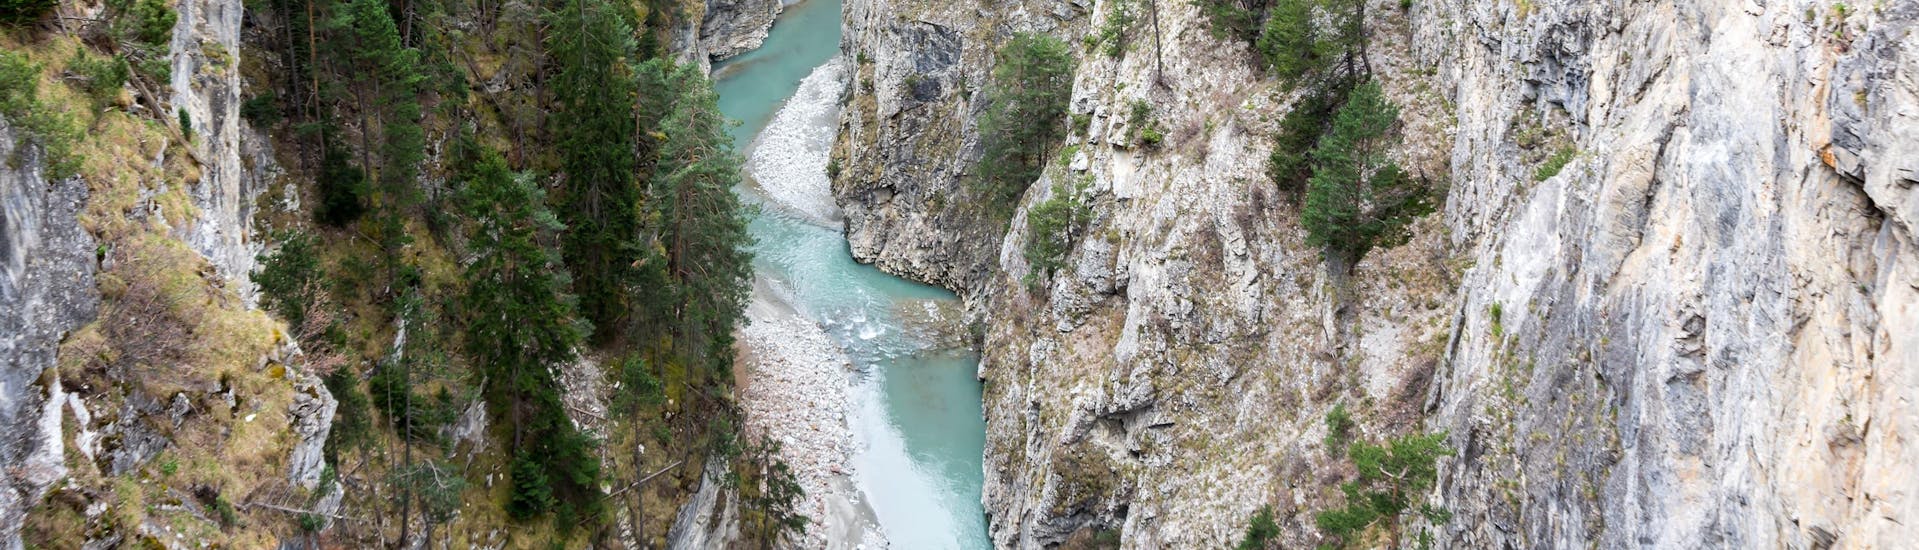 View of a gorge in the Annecy area where it is possible to do canyoning.